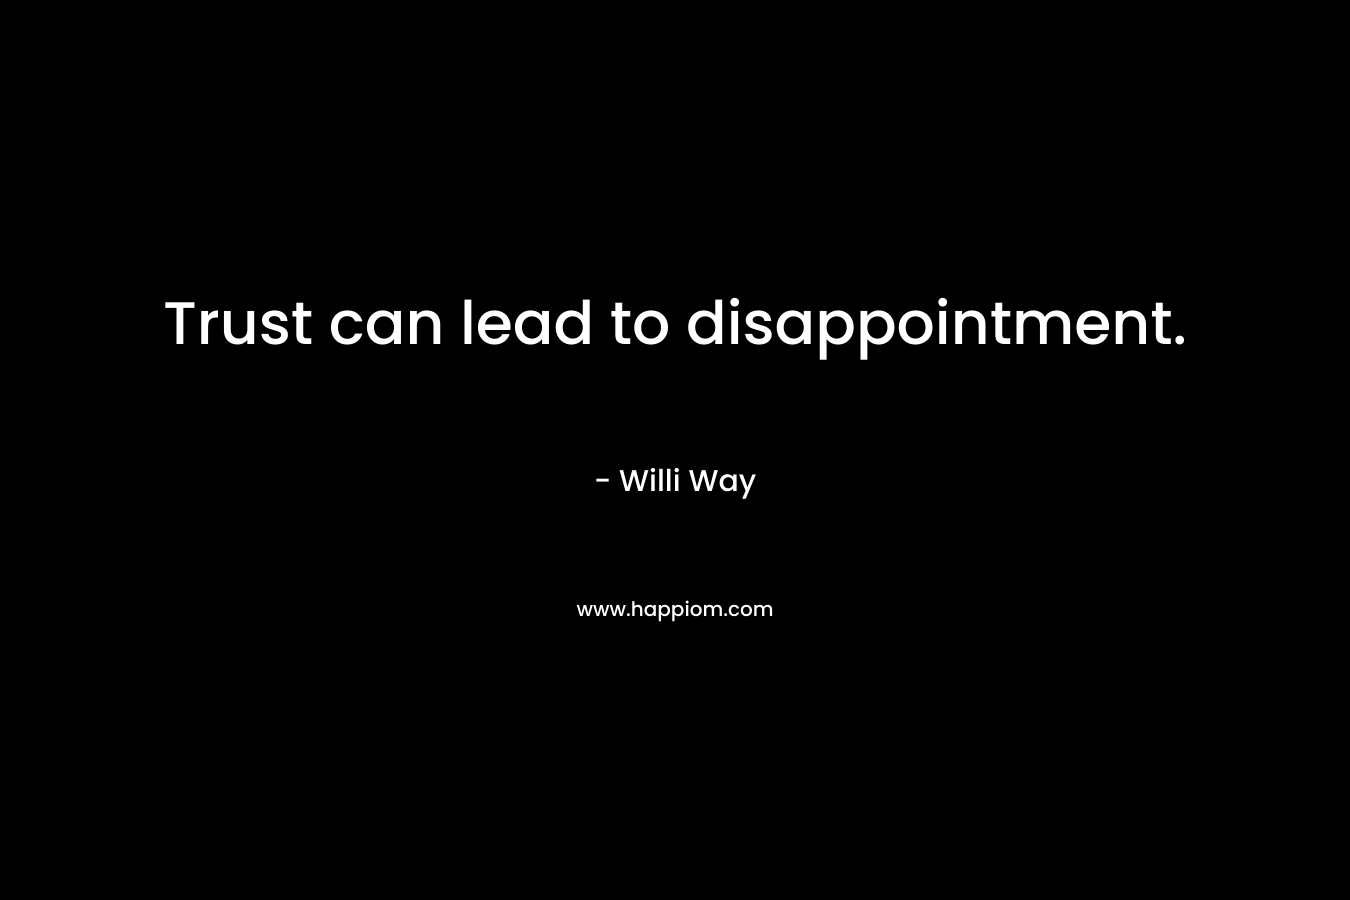 Trust can lead to disappointment.